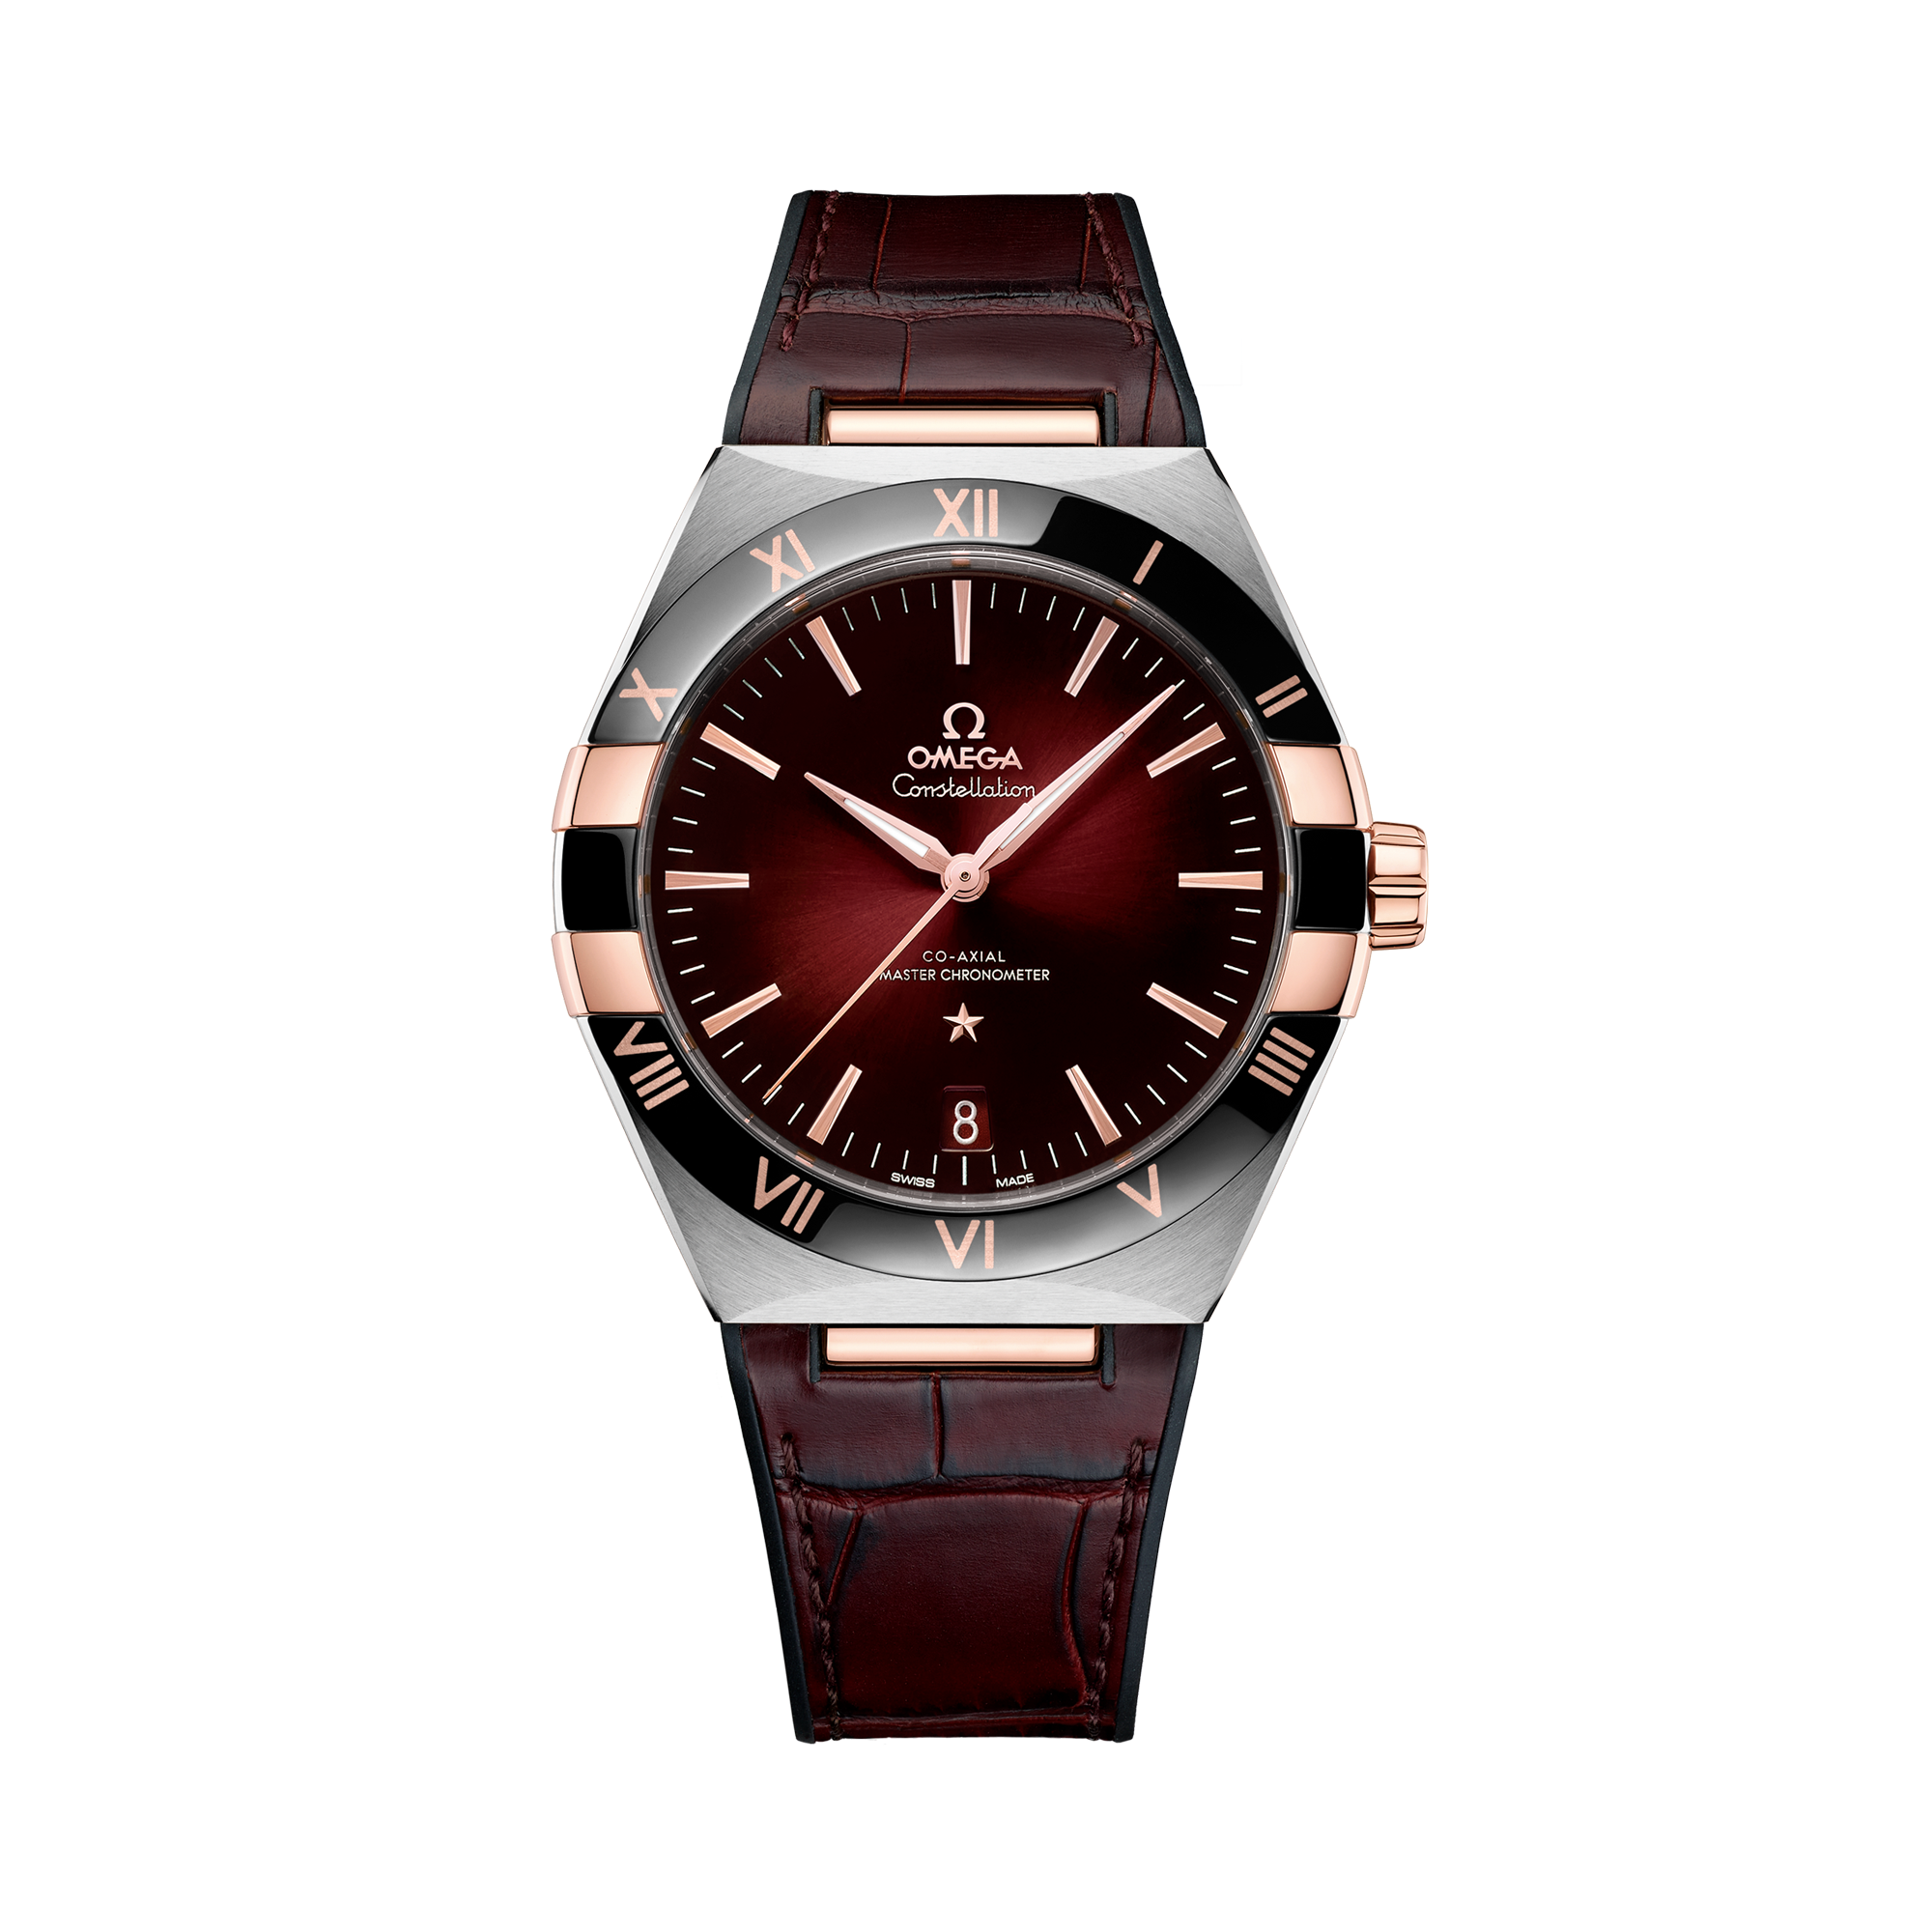 OMEGA Constellation 41mm, Red Dial, Baton Numerals_1